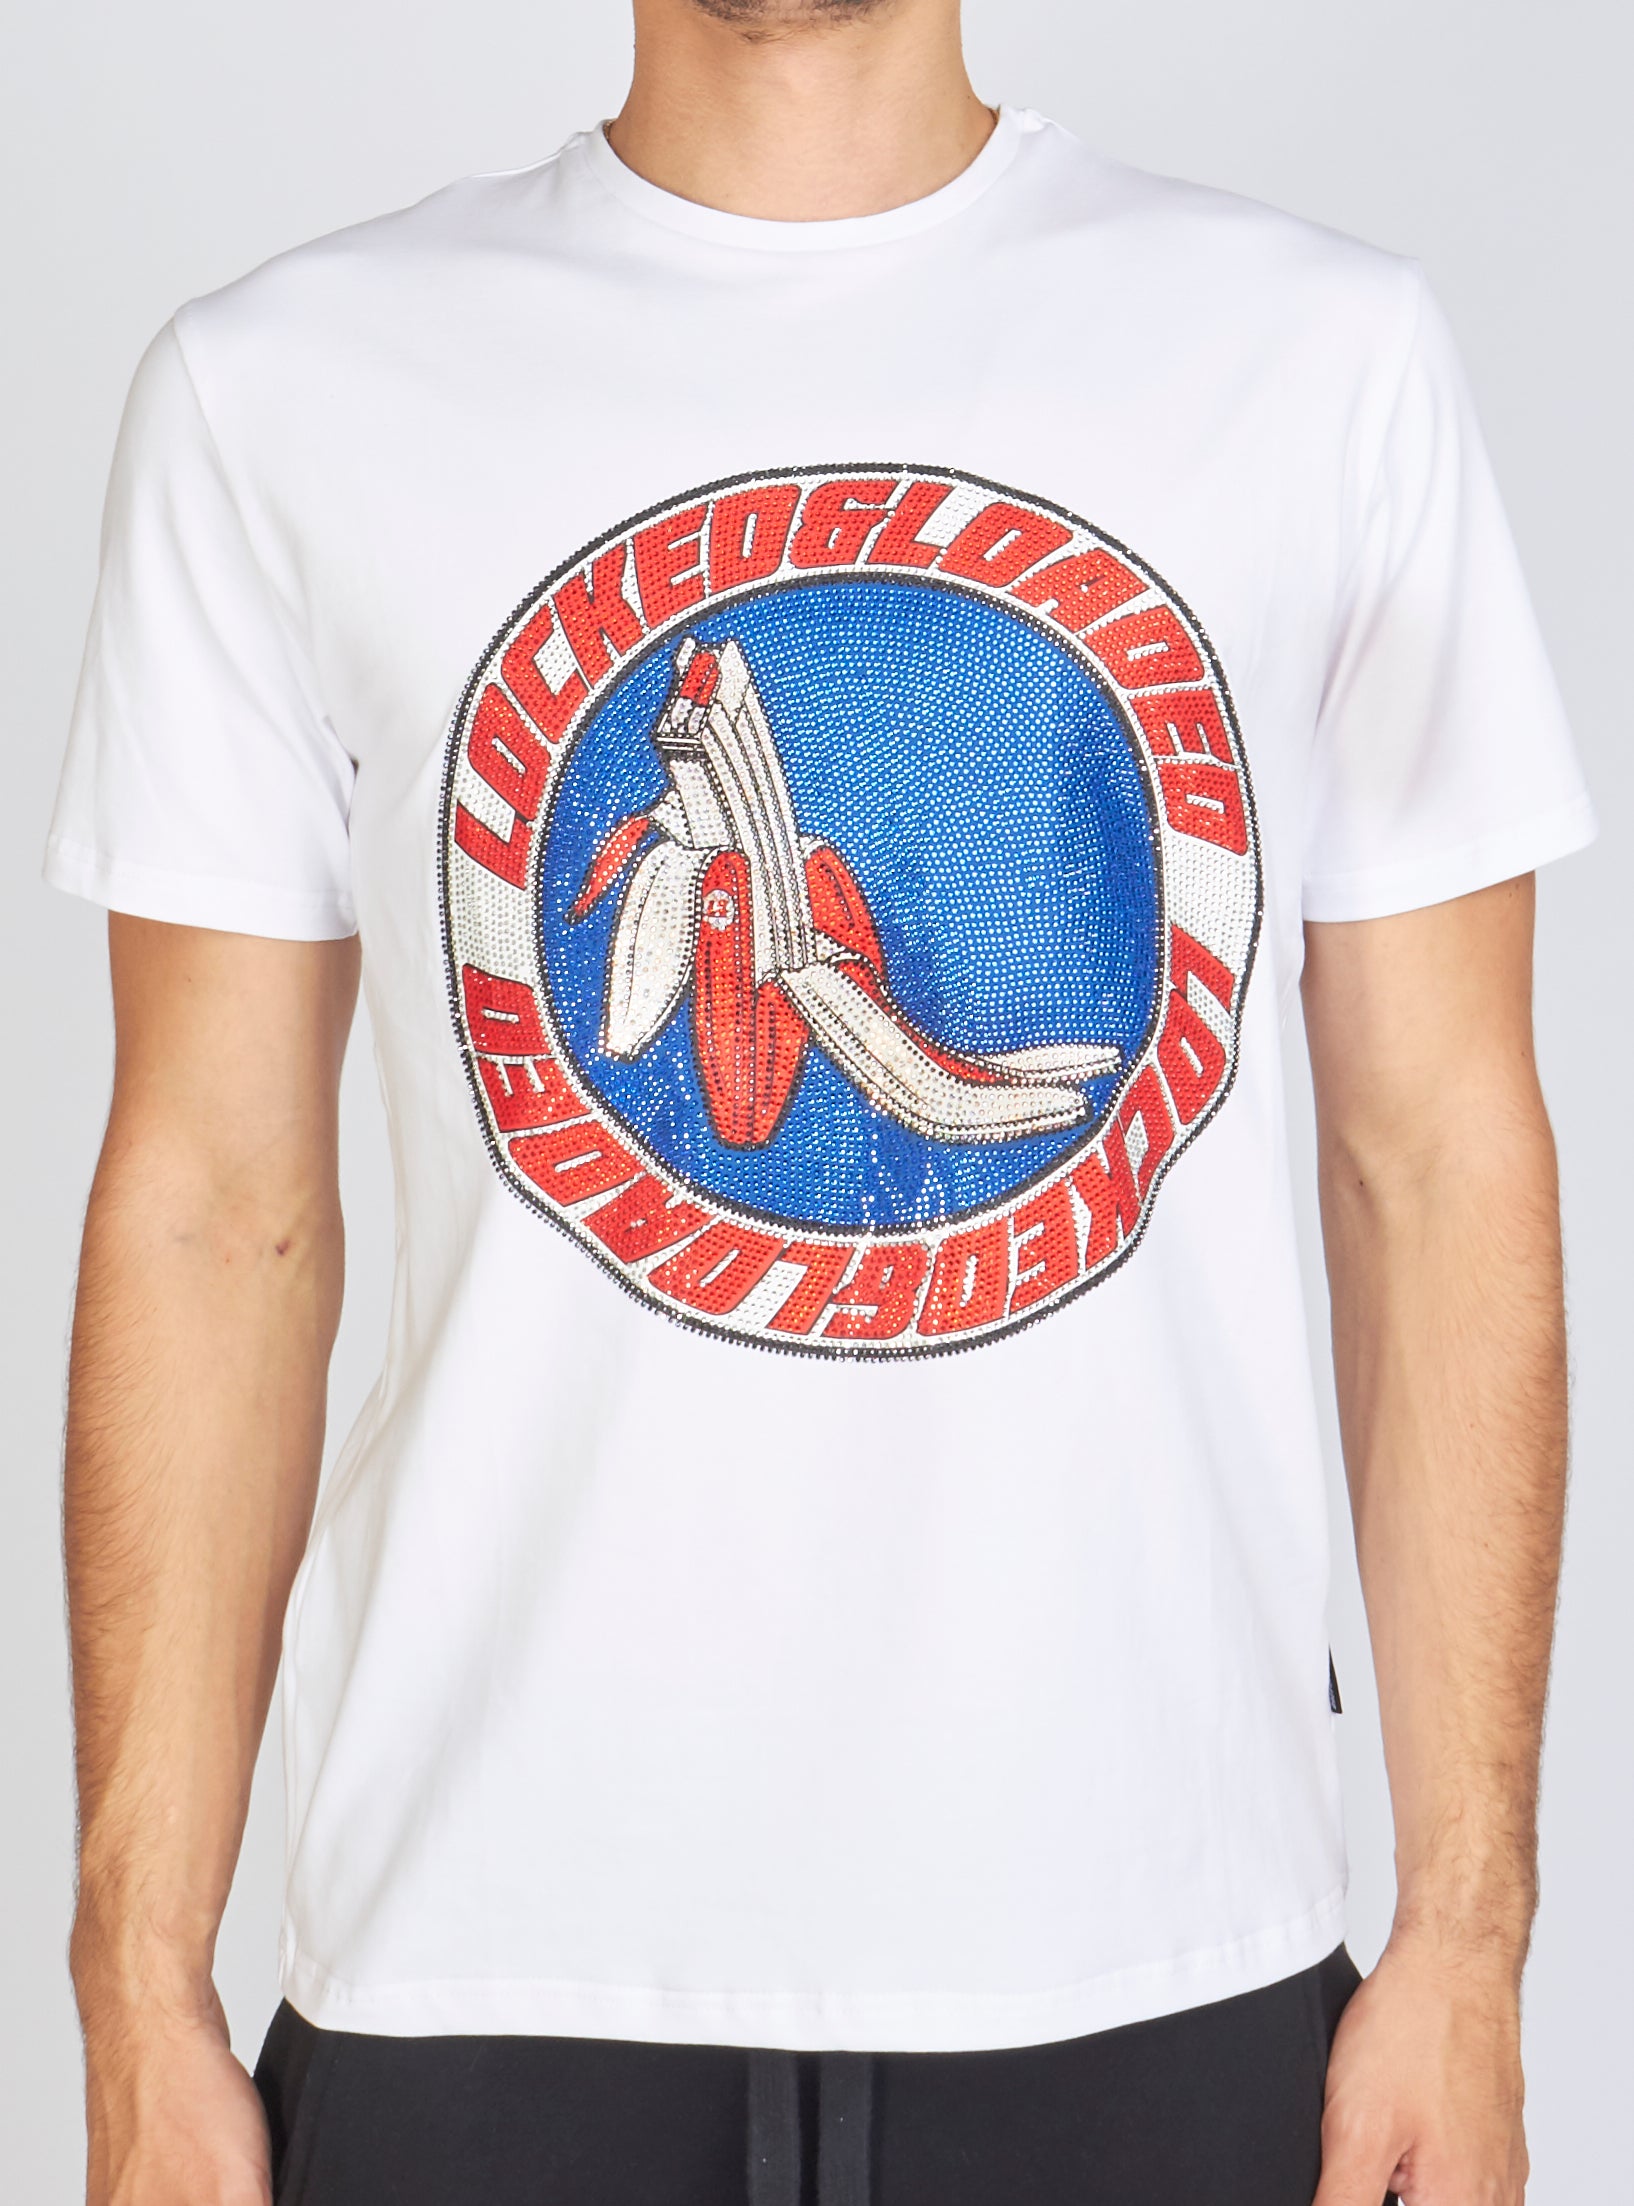 Locked & Loaded T-Shirt - B. Clip - Red and Blue on White - 109